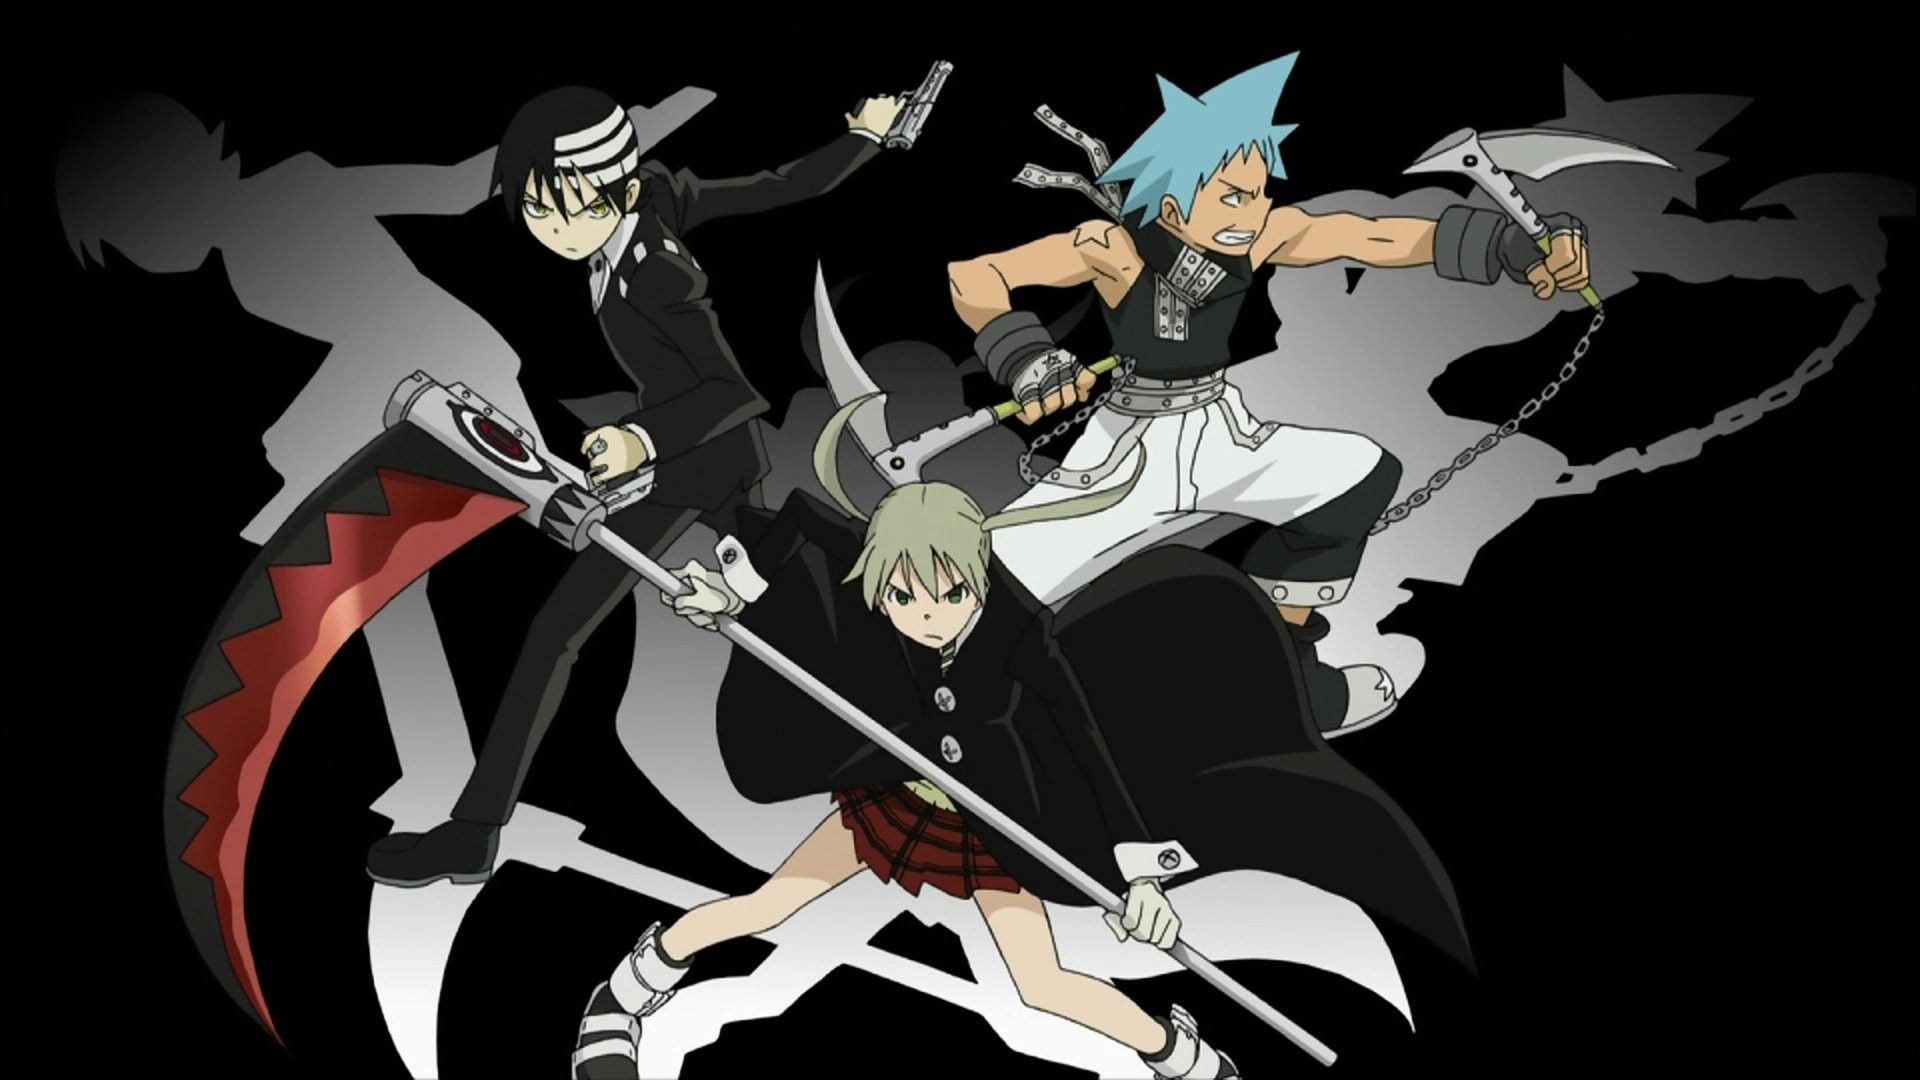 37 Soul Eater Wallpapers for iPhone and Android by Francisco Fernandez